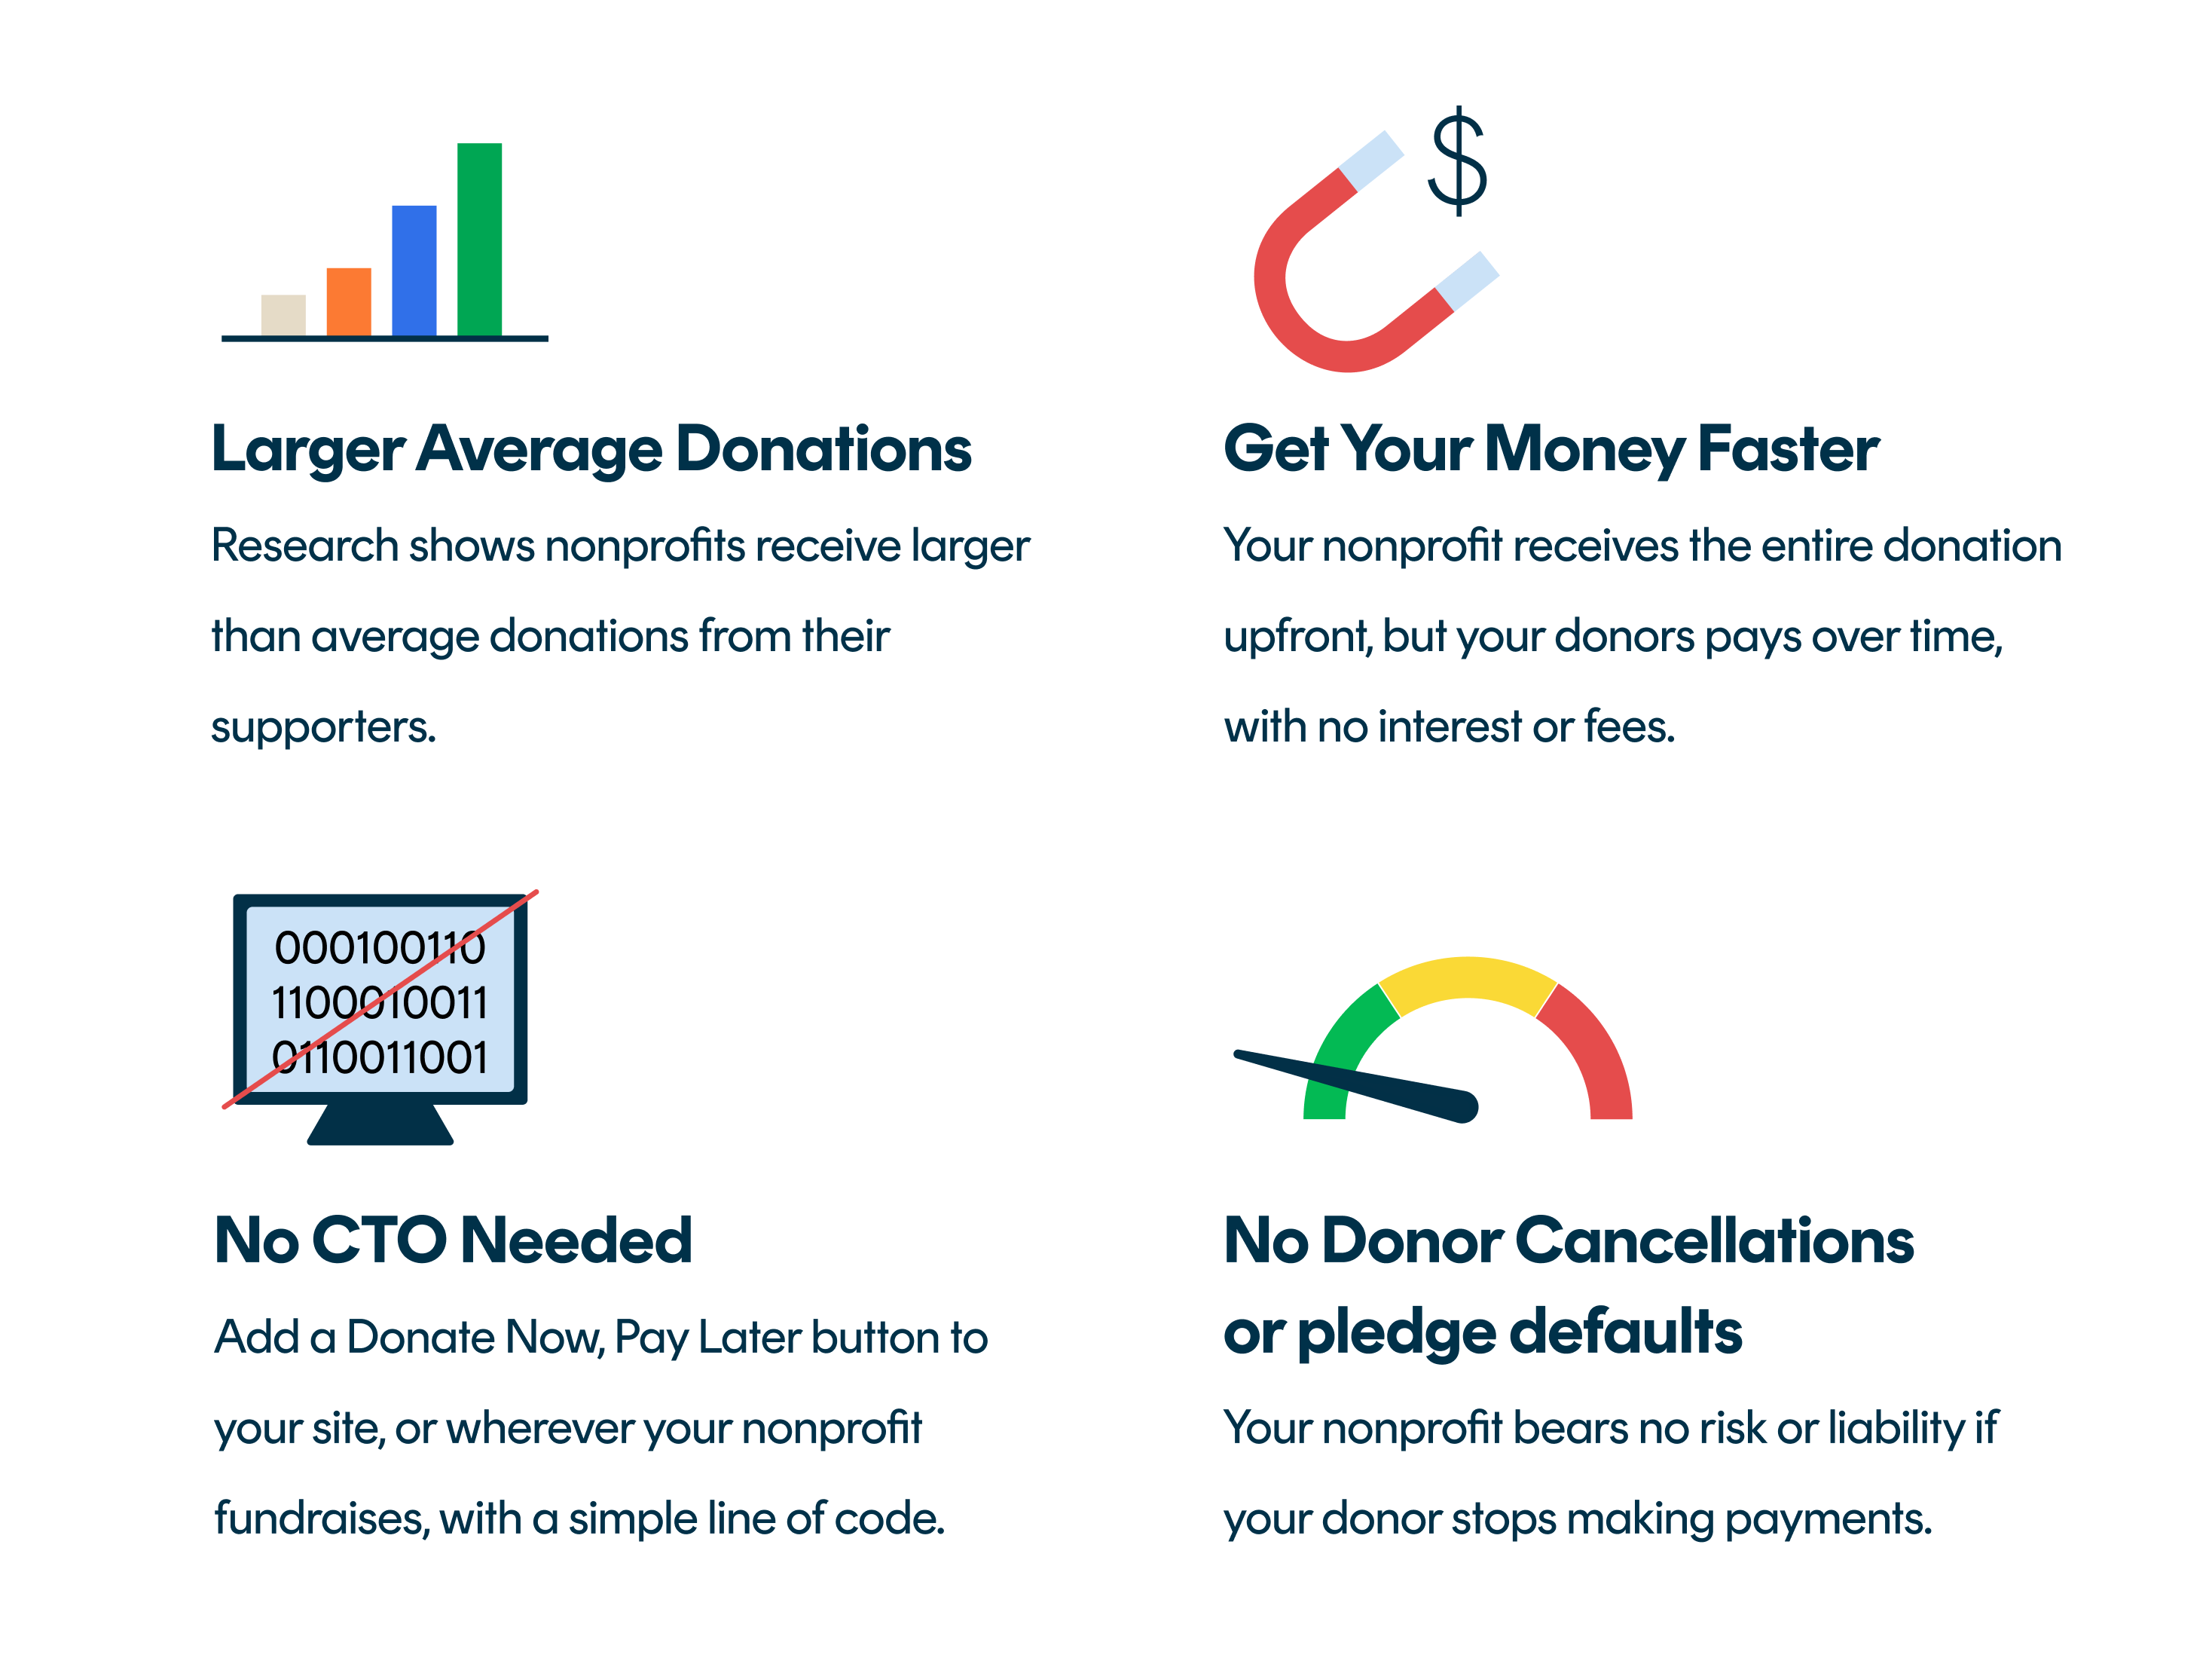 The benefits of Donate Now, Pay Later